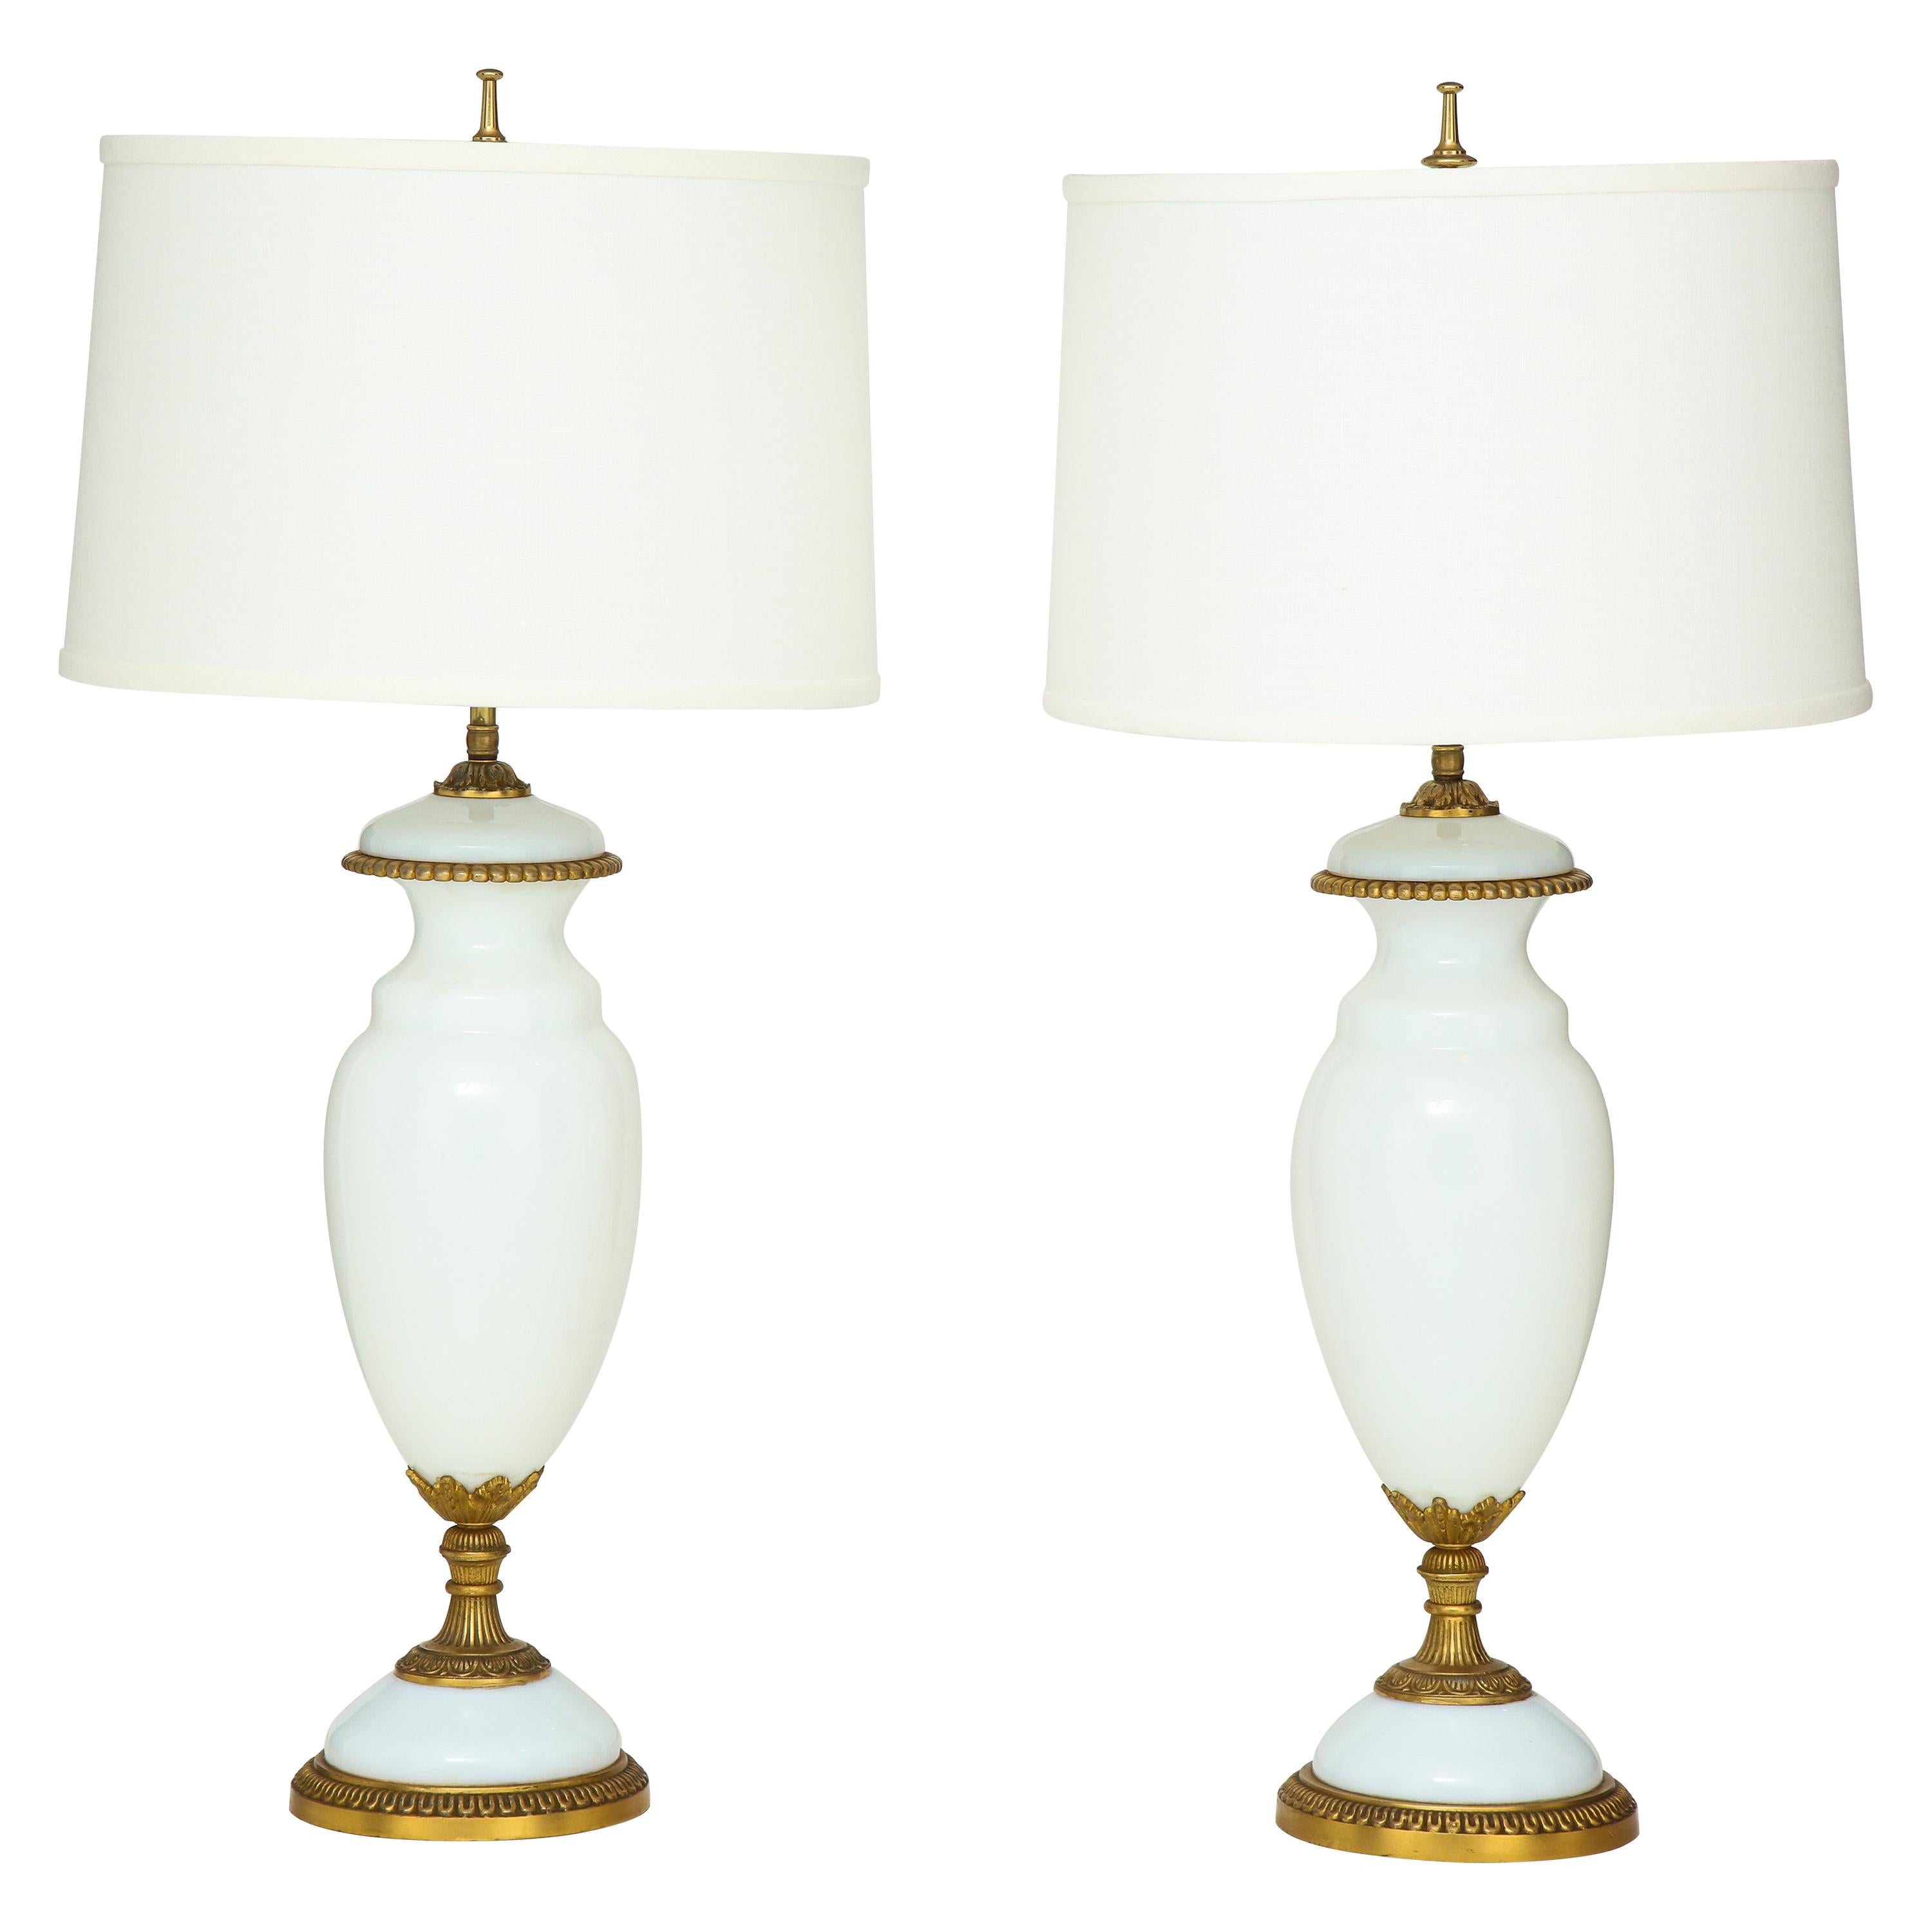 1950s Hollywood Regency Style Milk Glass And Brass Italian Table Lamps